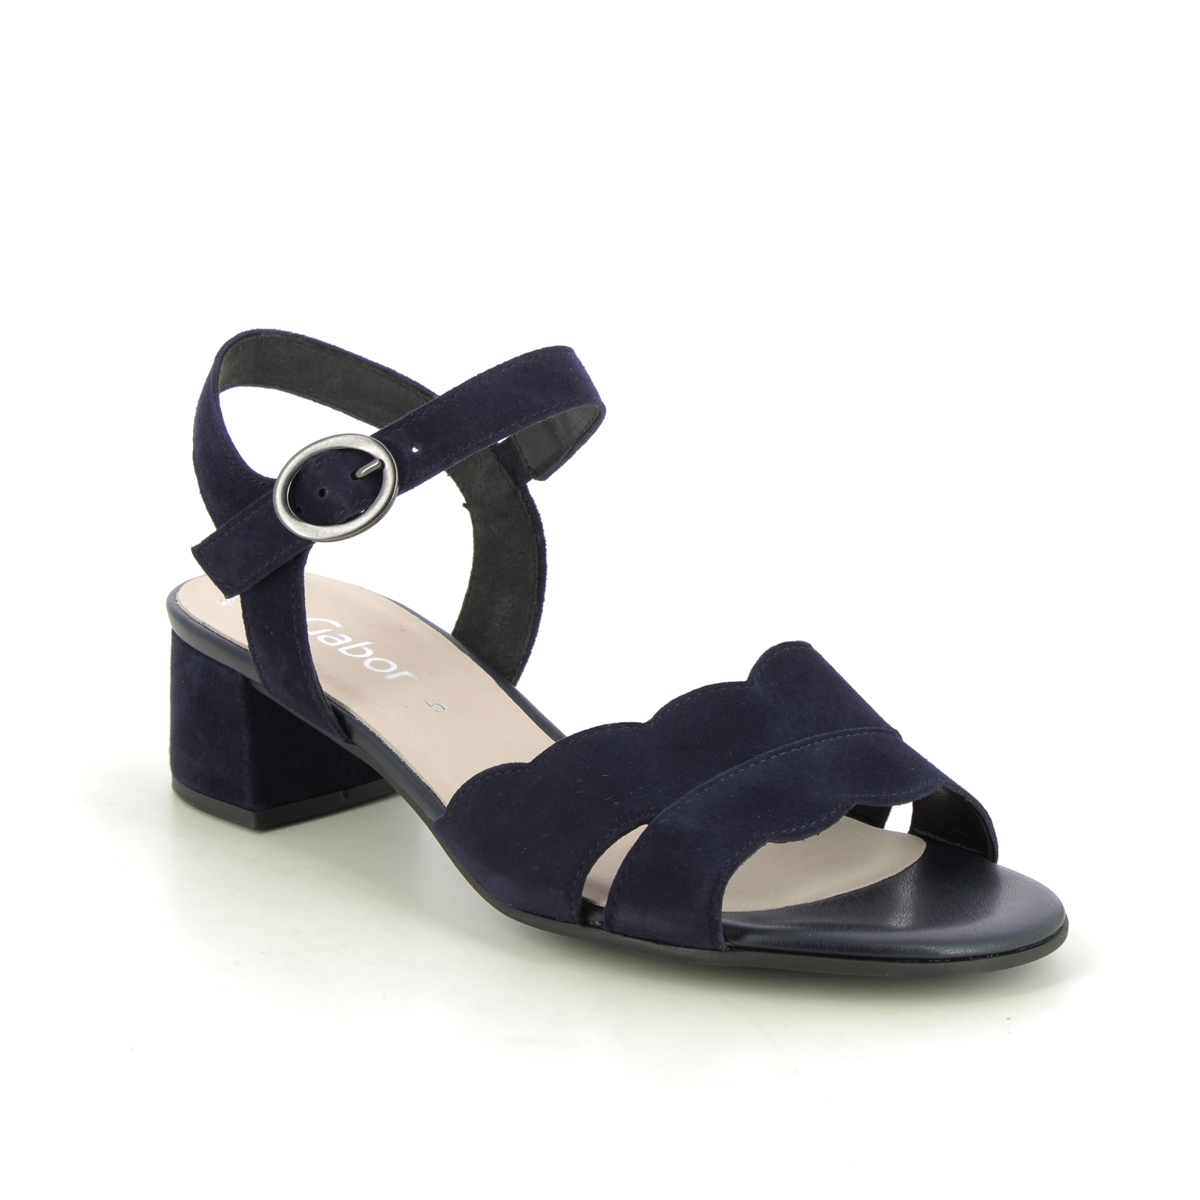 Gabor Bijou Jamma Navy Suede Womens Heeled Sandals 41.770.16 in a Plain Leather in Size 6.5